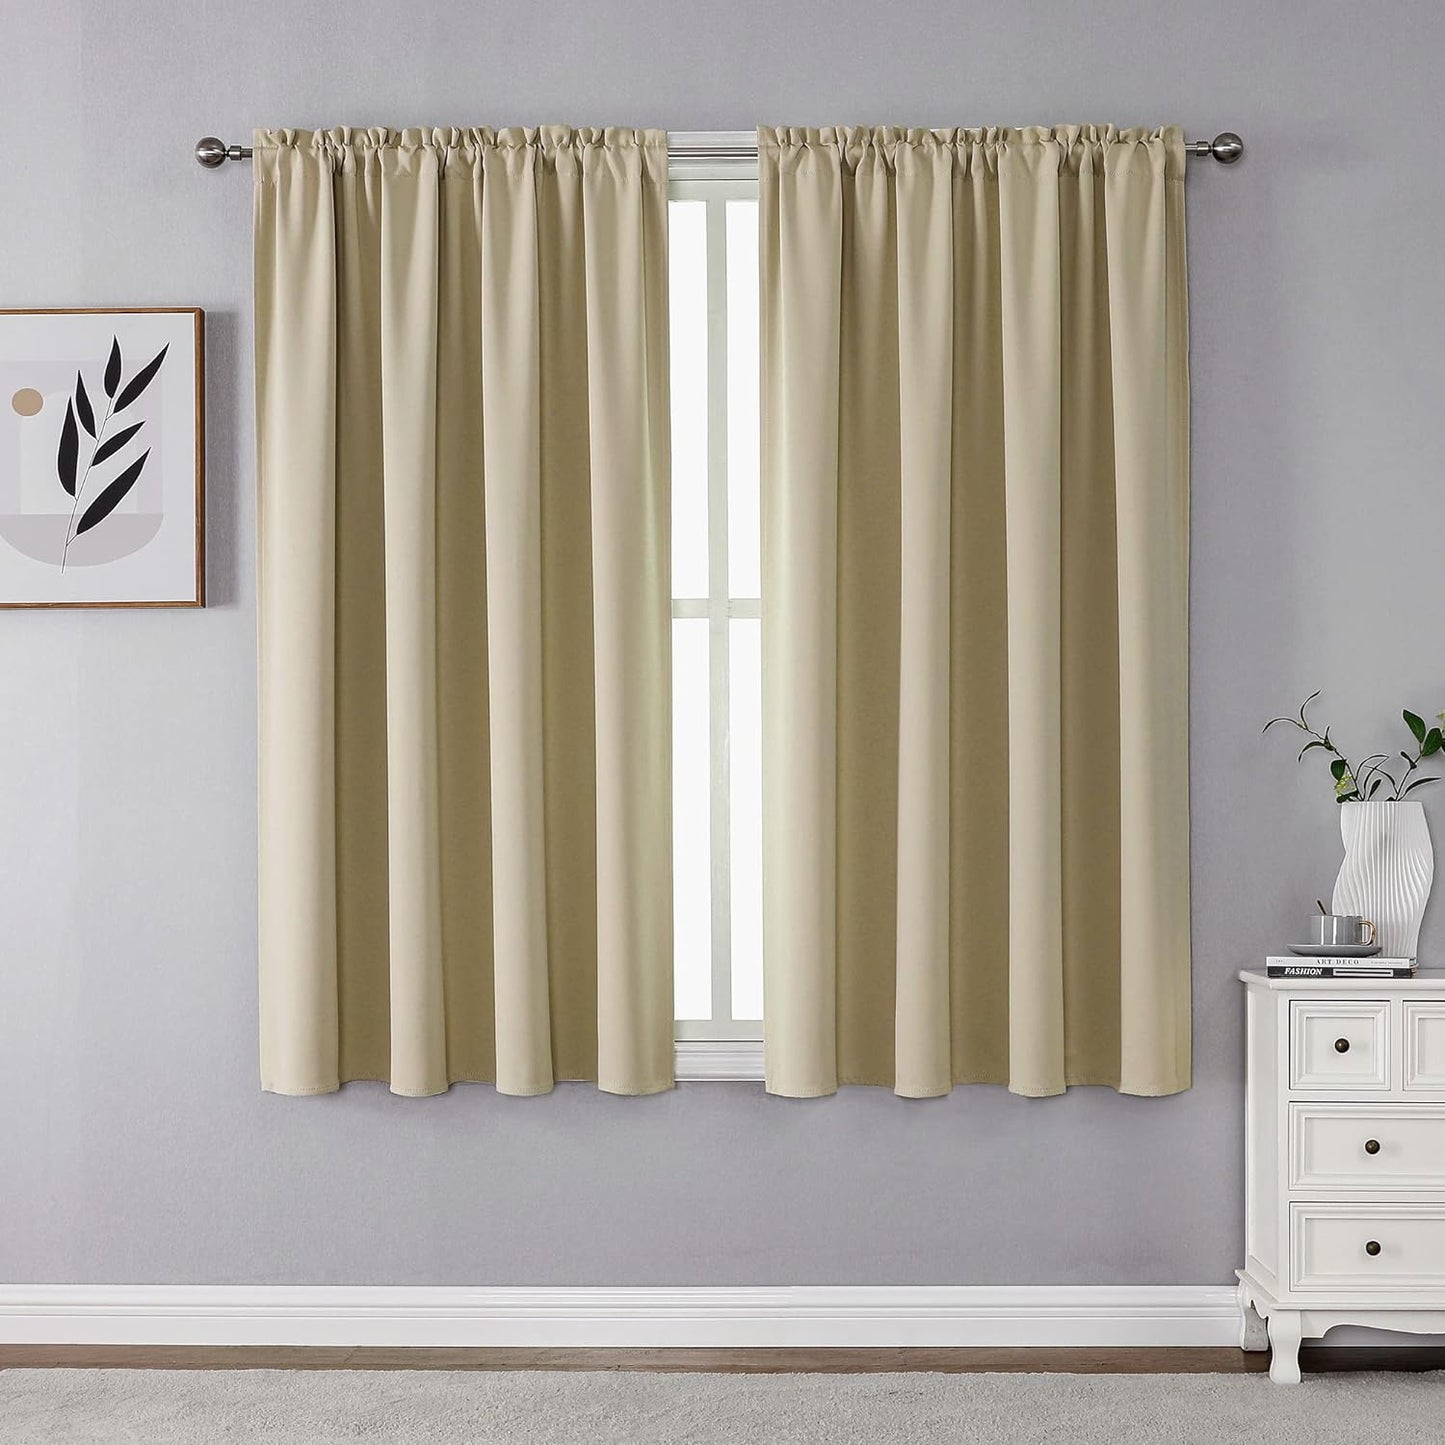 CUCRAF Blackout Curtains 84 Inches Long for Living Room, Light Beige Room Darkening Window Curtain Panels, Rod Pocket Thermal Insulated Solid Drapes for Bedroom, 52X84 Inch, Set of 2 Panels  CUCRAF Beige 52W X 54L Inch 2 Panels 